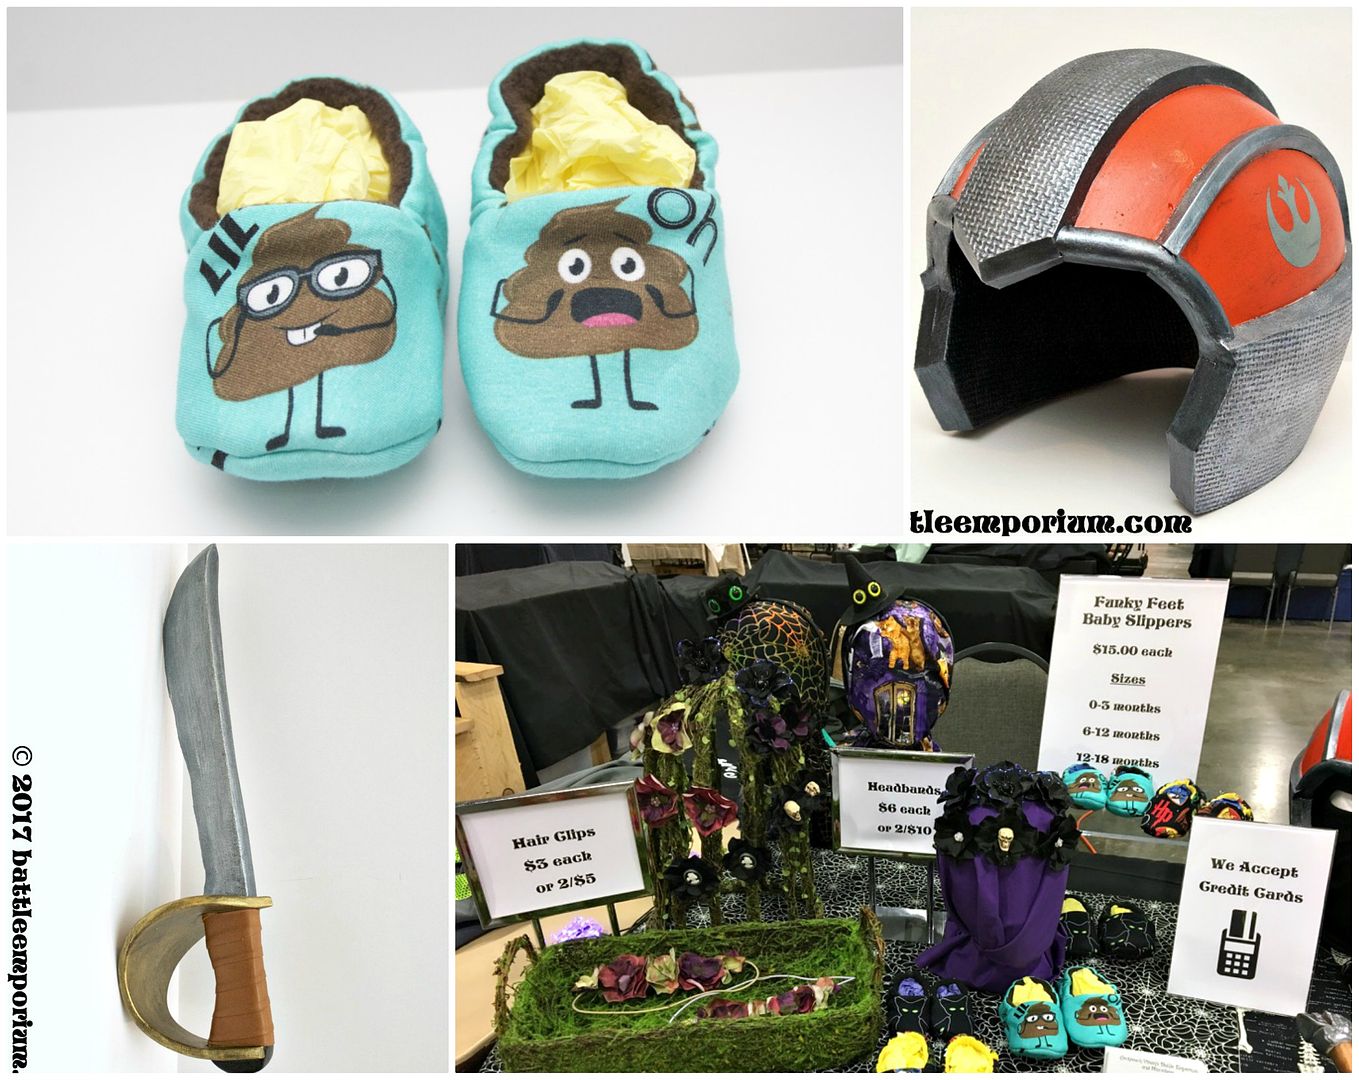 Sew Can Do Craft Shows, Foam Swords & Poo Themed Baby Shoes